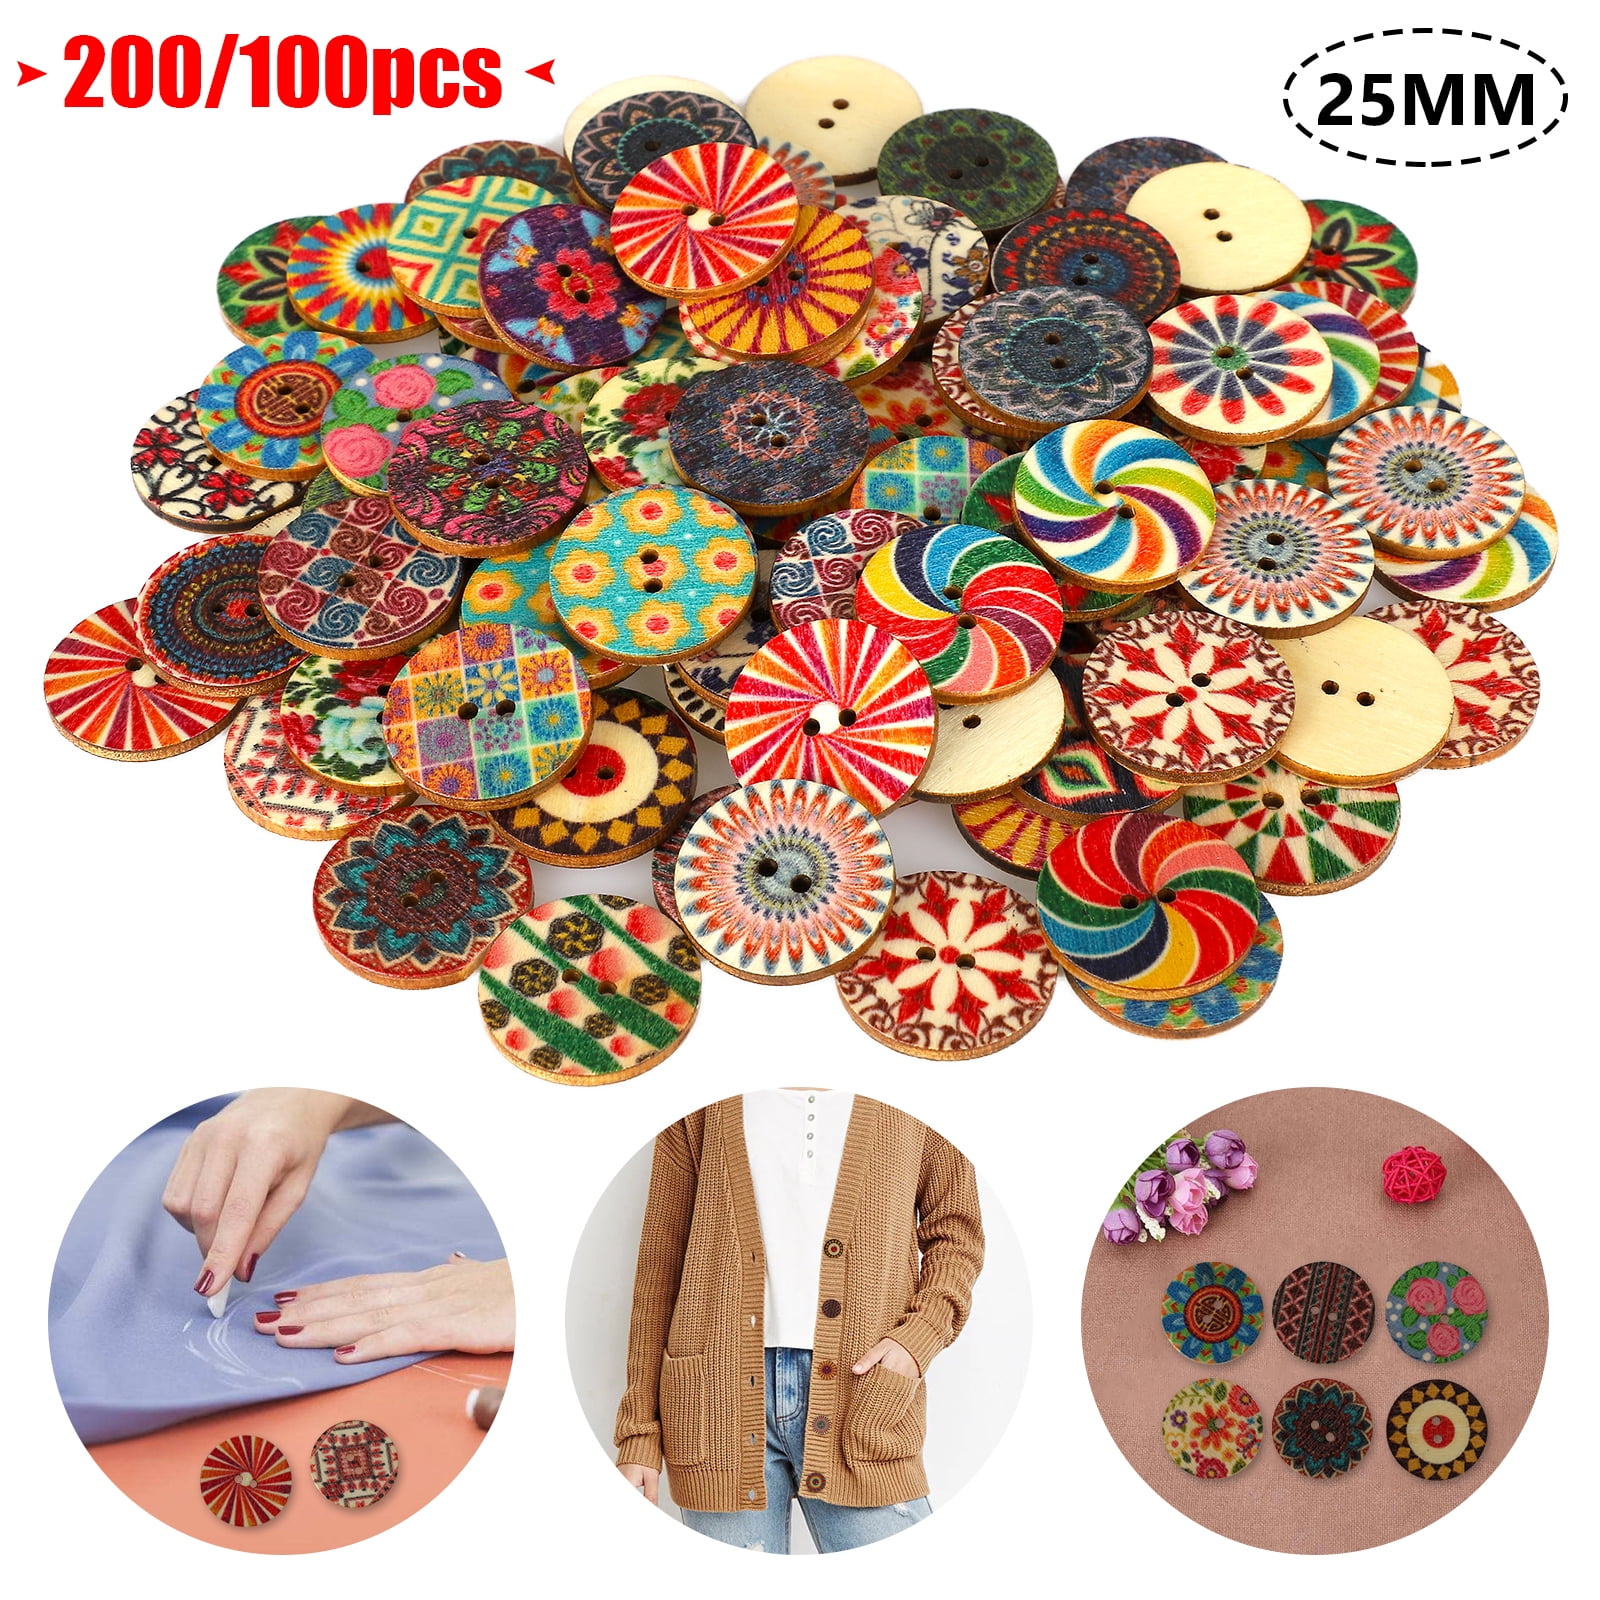 Welecom 1000Pcs Flower Craft Buttons Favorite Findings Basic Button Christmas Mixed Colors Size Bulk Buttons,2 and 4 Holes Round Resin Sewing Scrapbook Buttons for DIY Art&Crafts Projects 